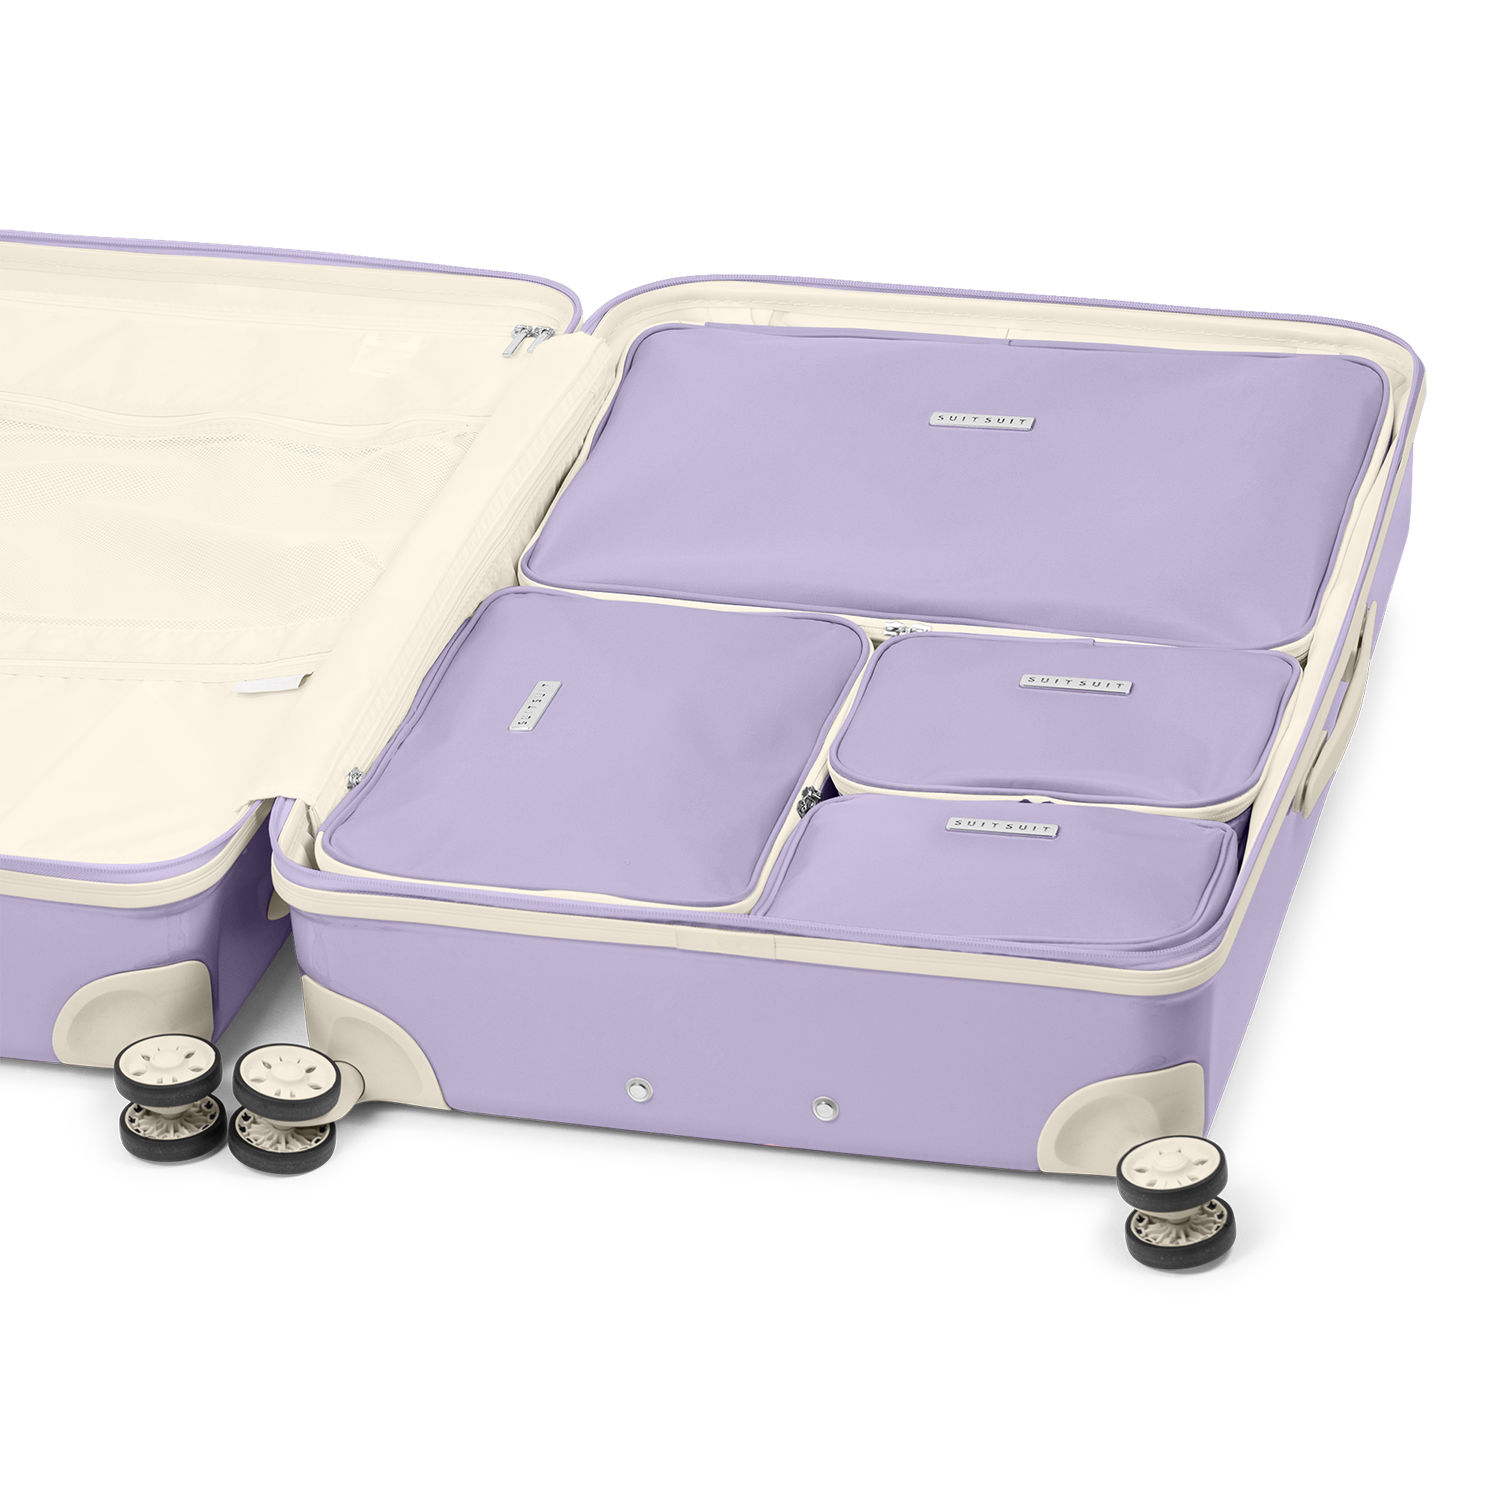 Fabulous Fifties - Royal Lavender - Packing Cube Set (28 inch)